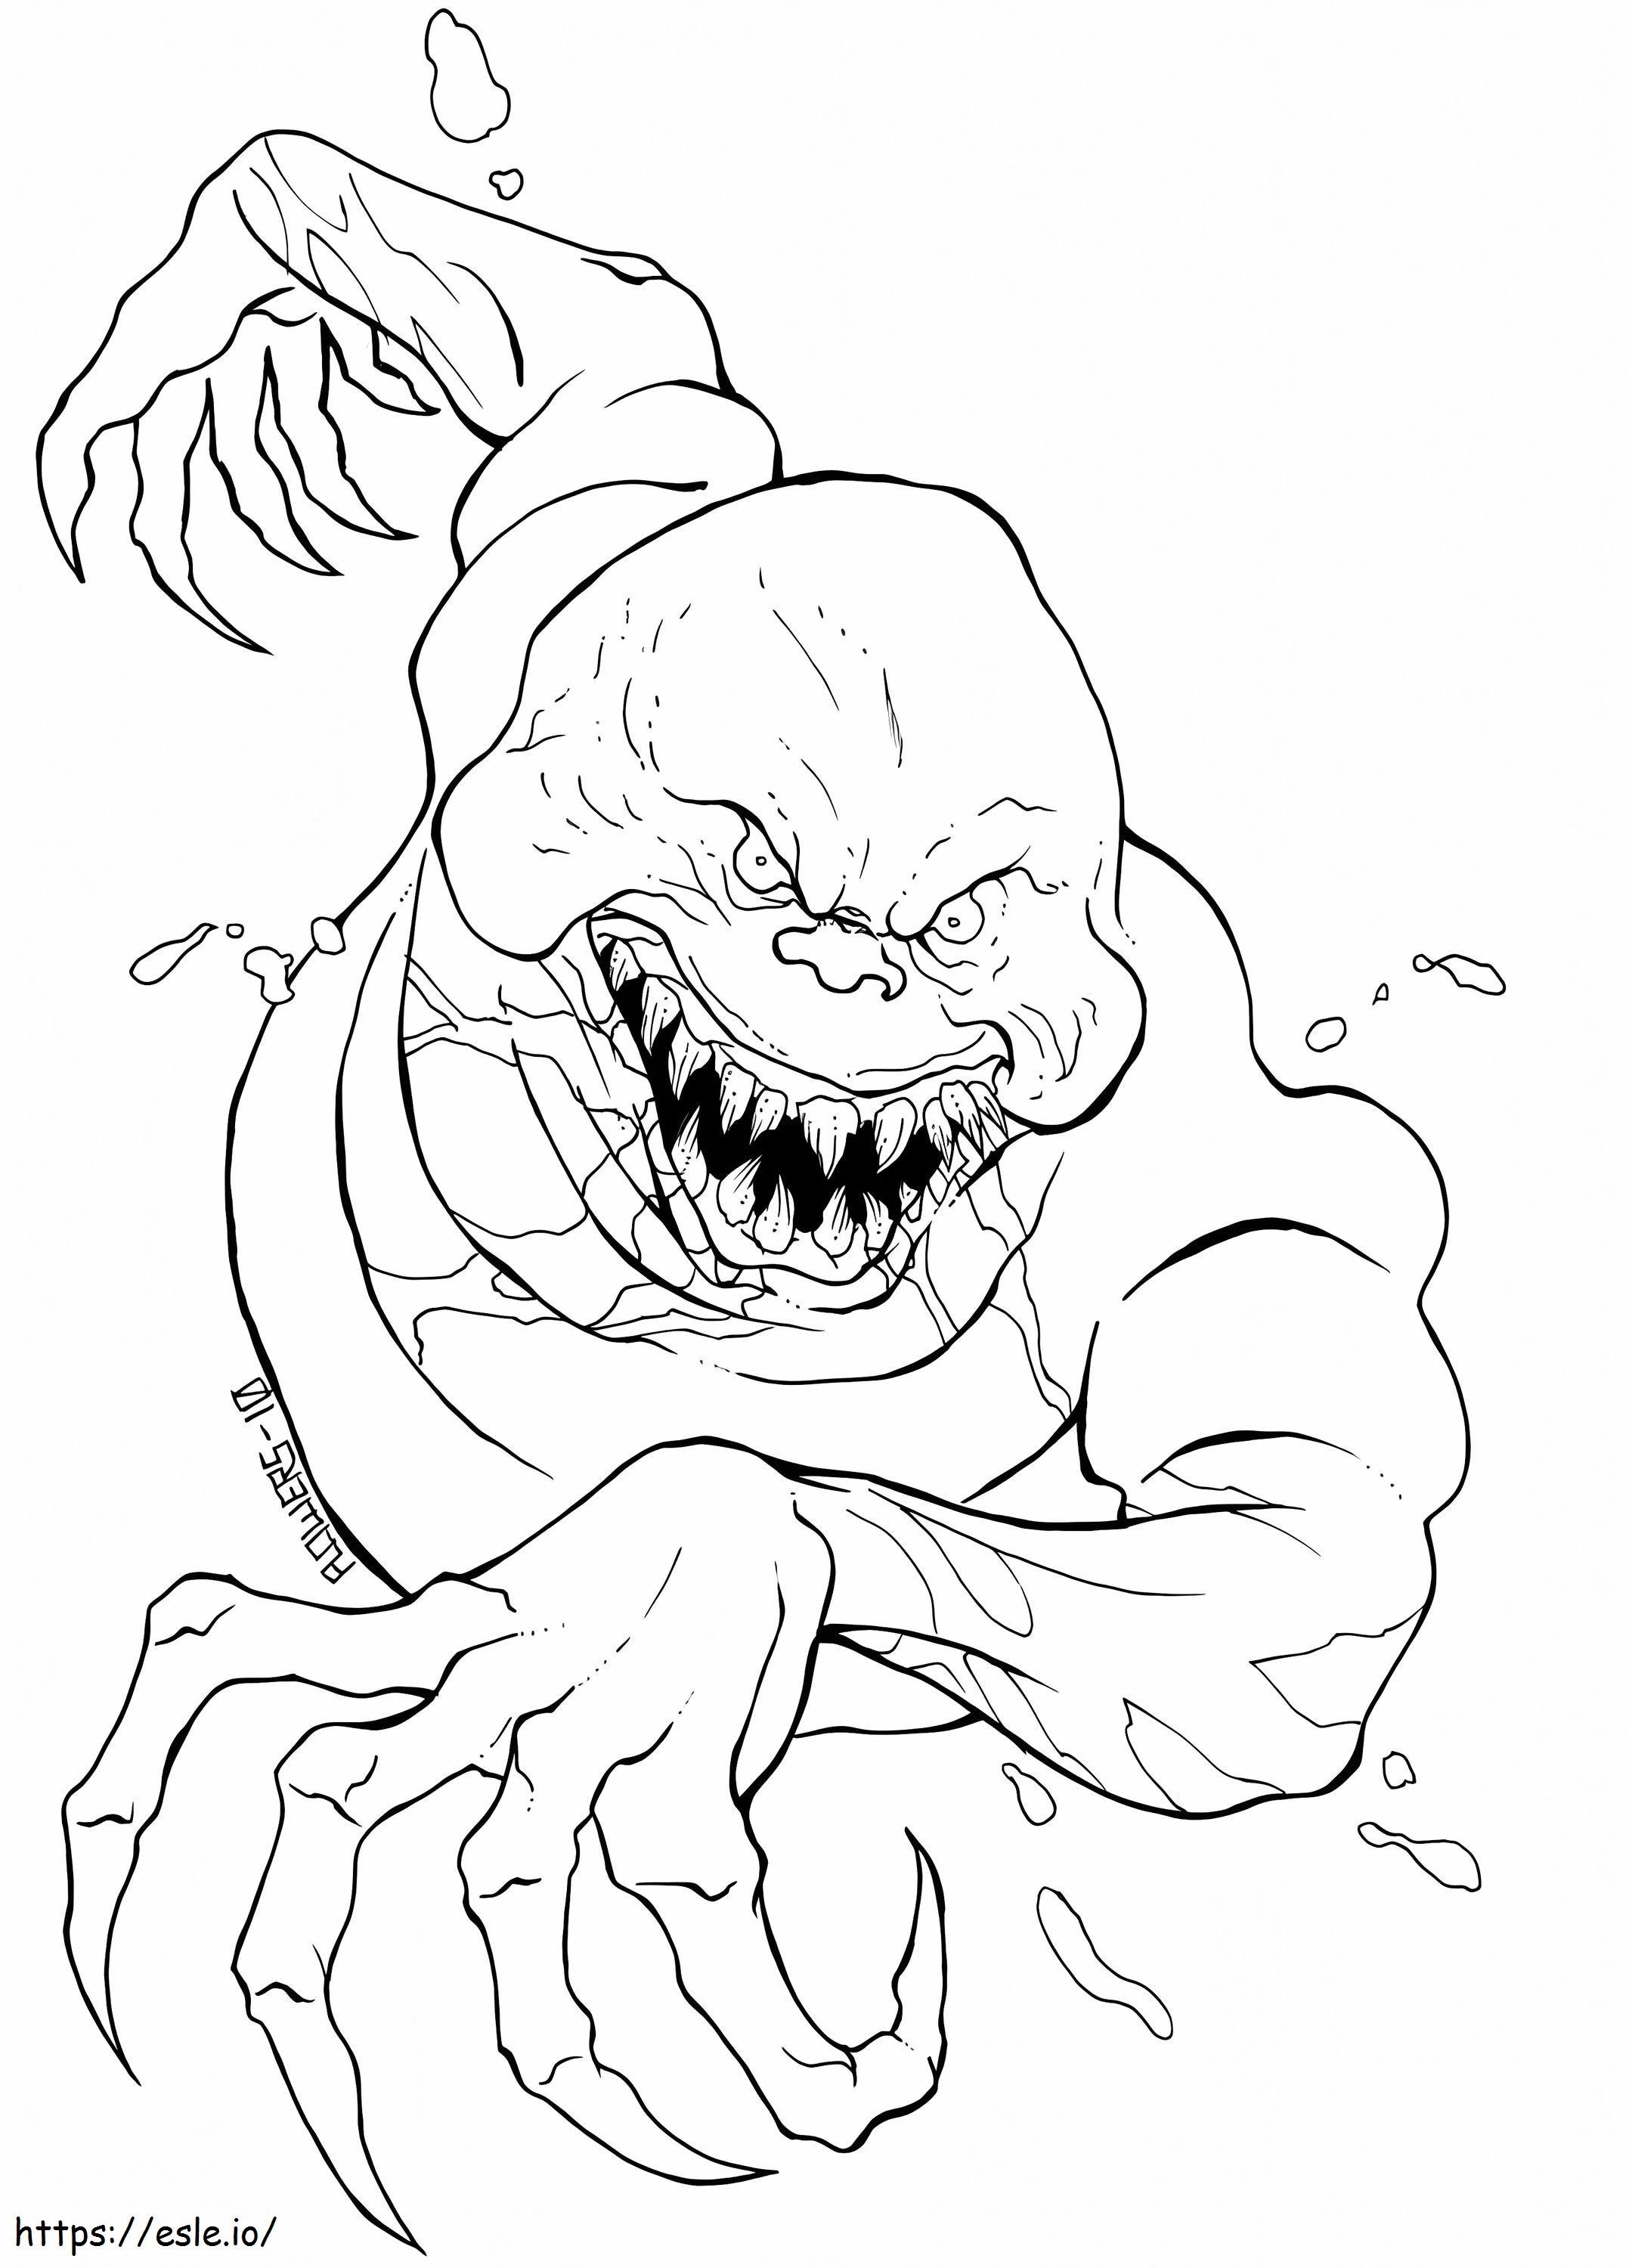 Horror Ghost coloring page